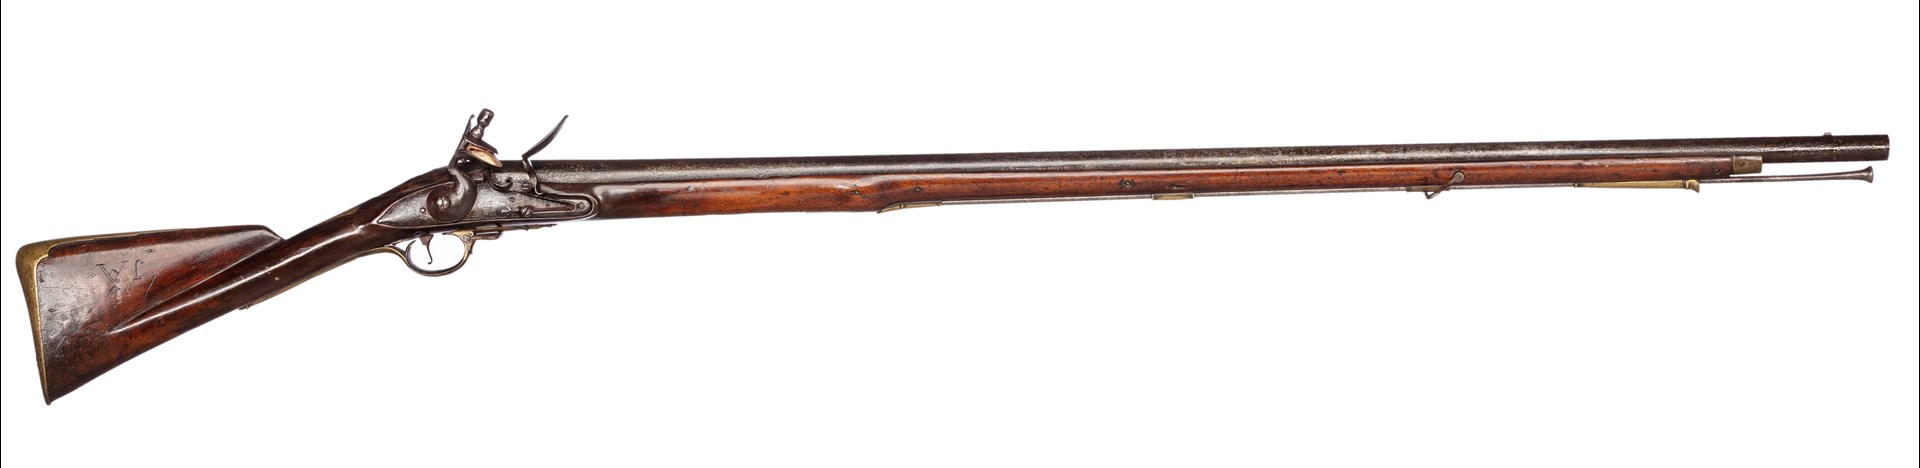 A 1756 Long Land Pattern Brown Bess shown on white